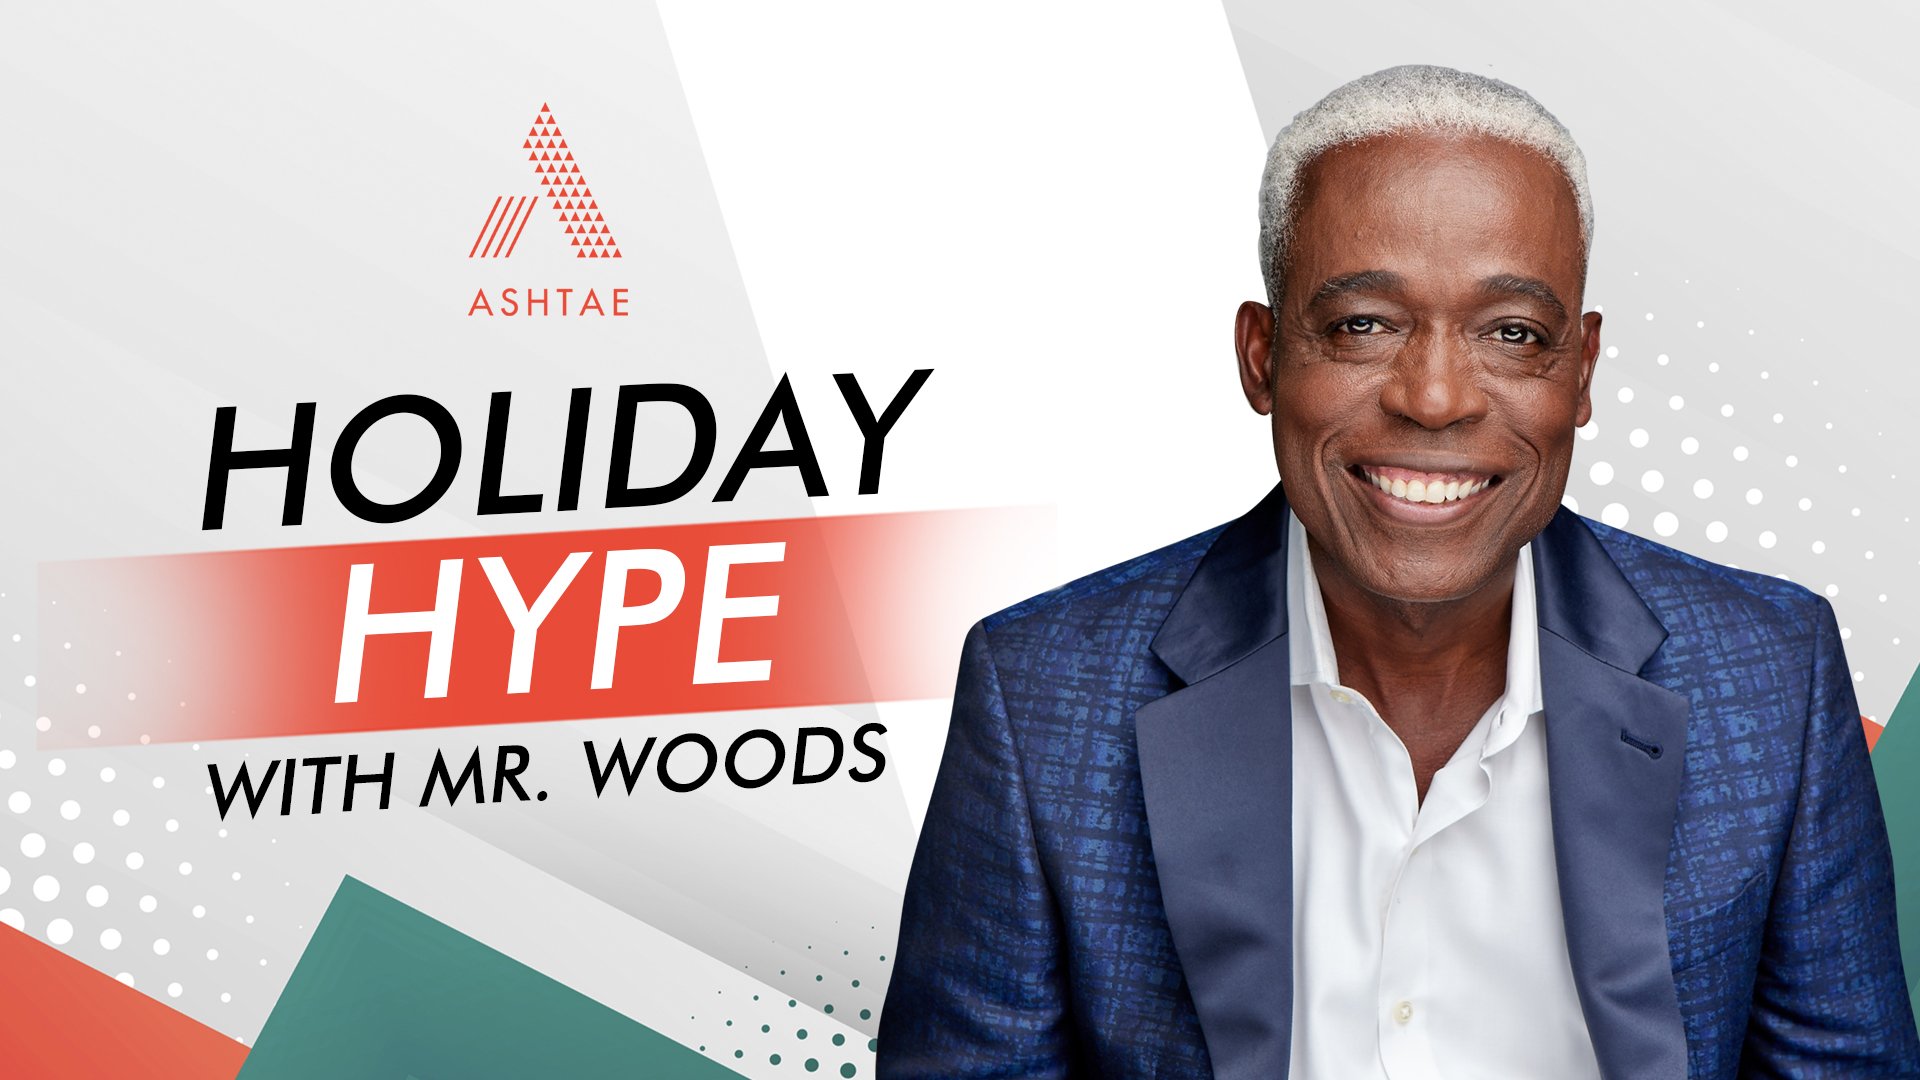 Holiday Hype with Mr. Woods